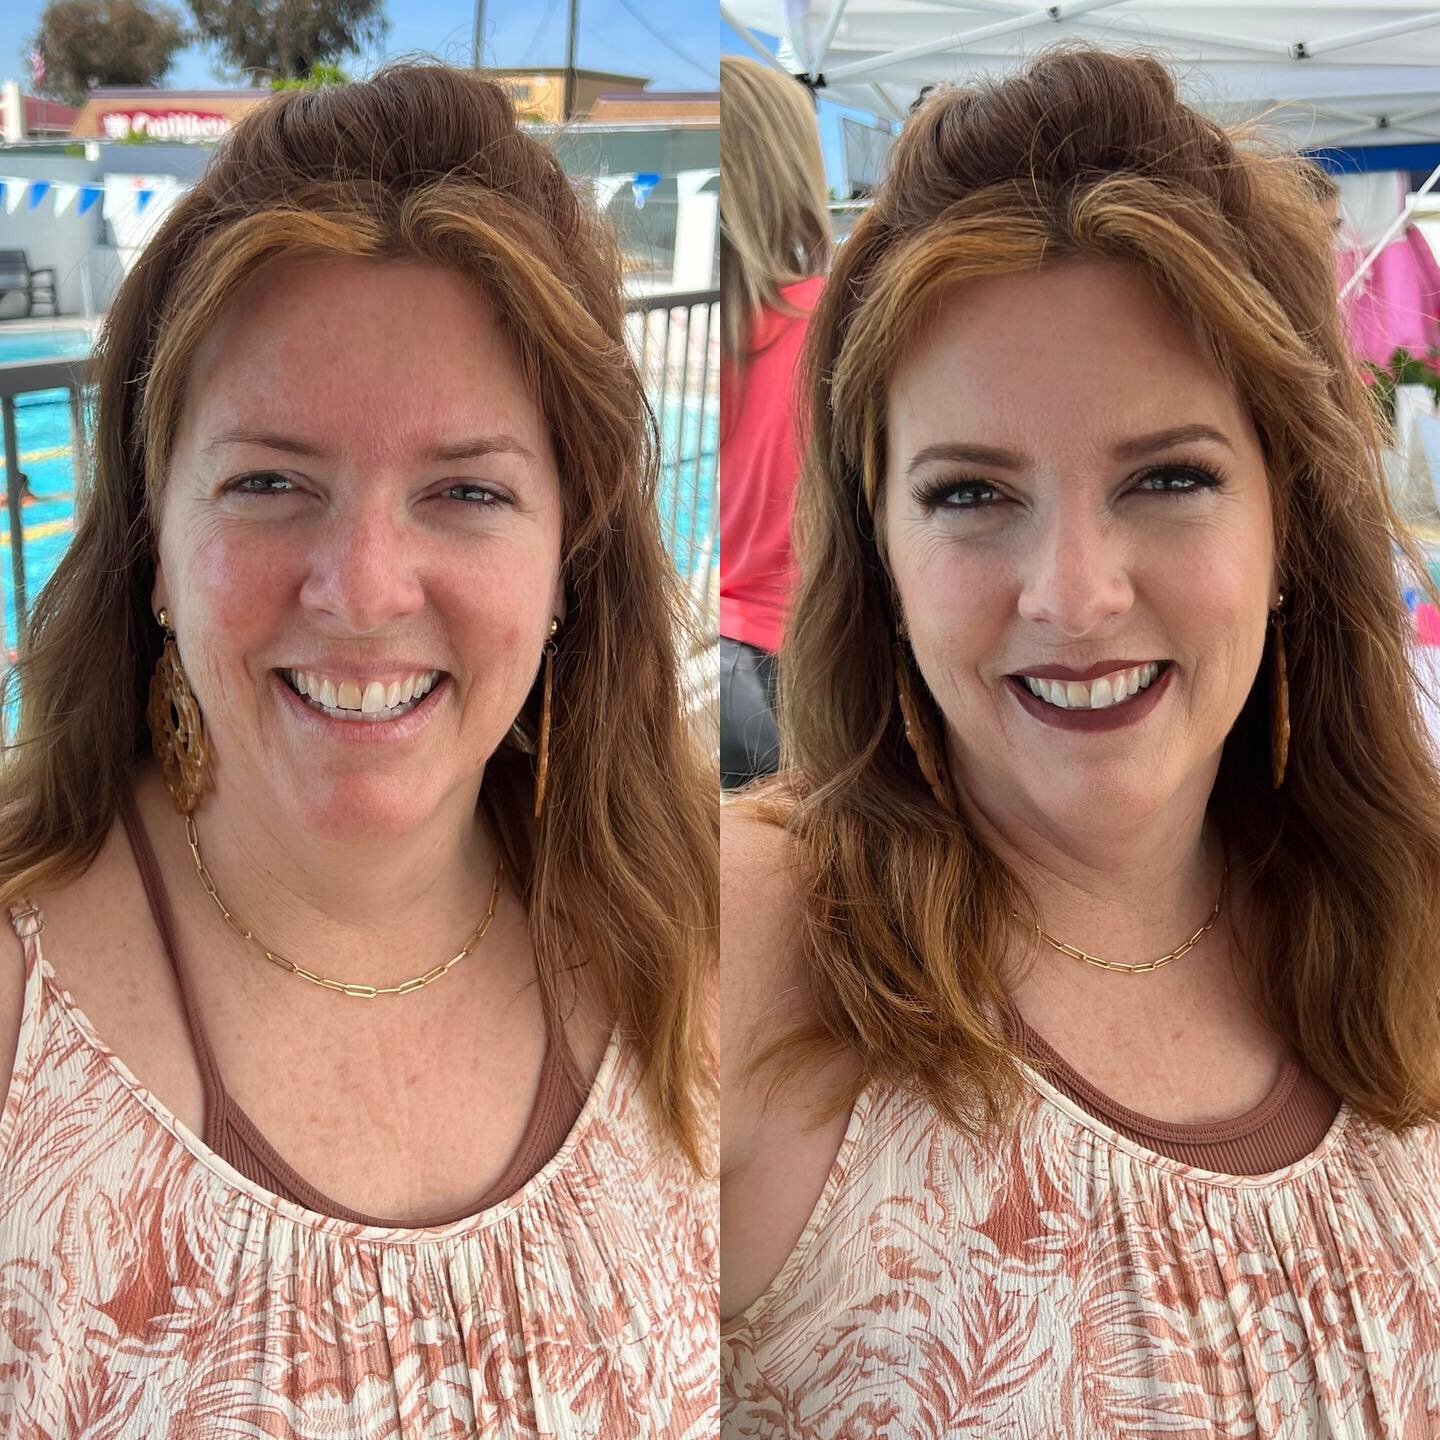 The one time I remember to take a &ldquo;before&rdquo; and &ldquo;after&rdquo; lol. My lovely friend, @cocoowcharwellness agreed to be my model for the @liftbwa vendor event at @rslaquatics today! I got to glam her up a bit and send her home to her N